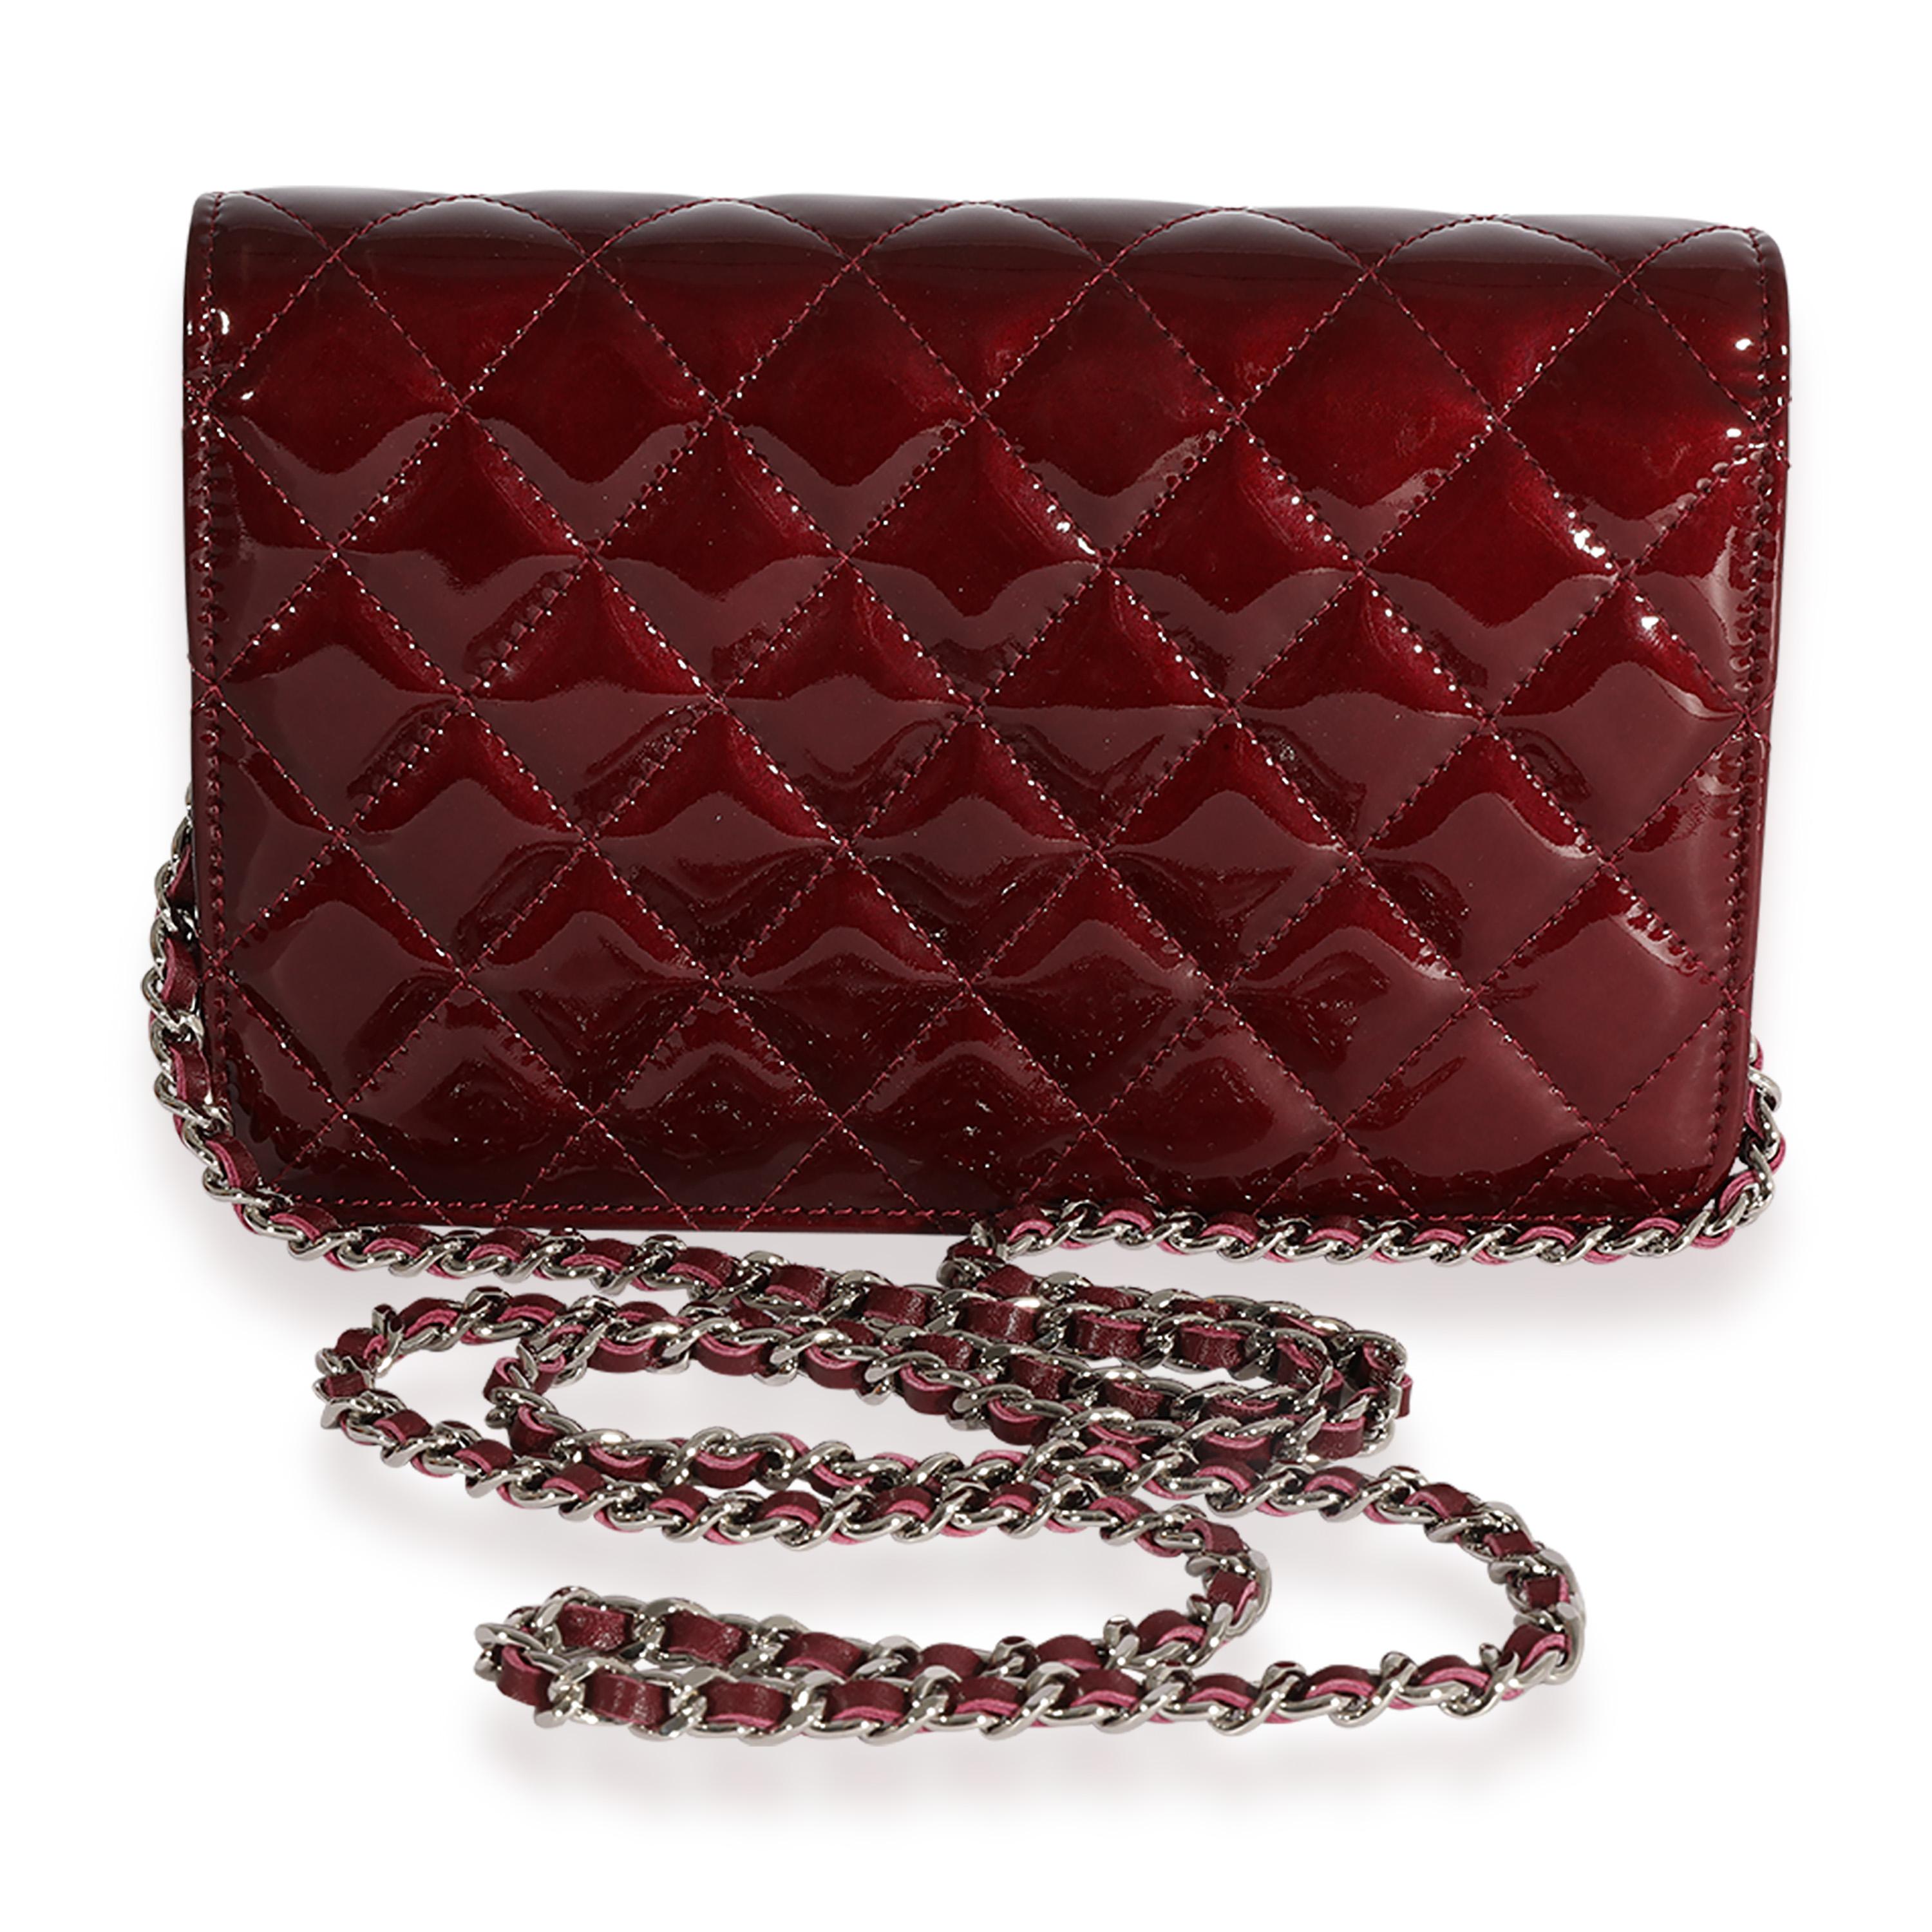 Black Chanel Burgundy Quilted Patent Leather Brilliant Wallet On Chain